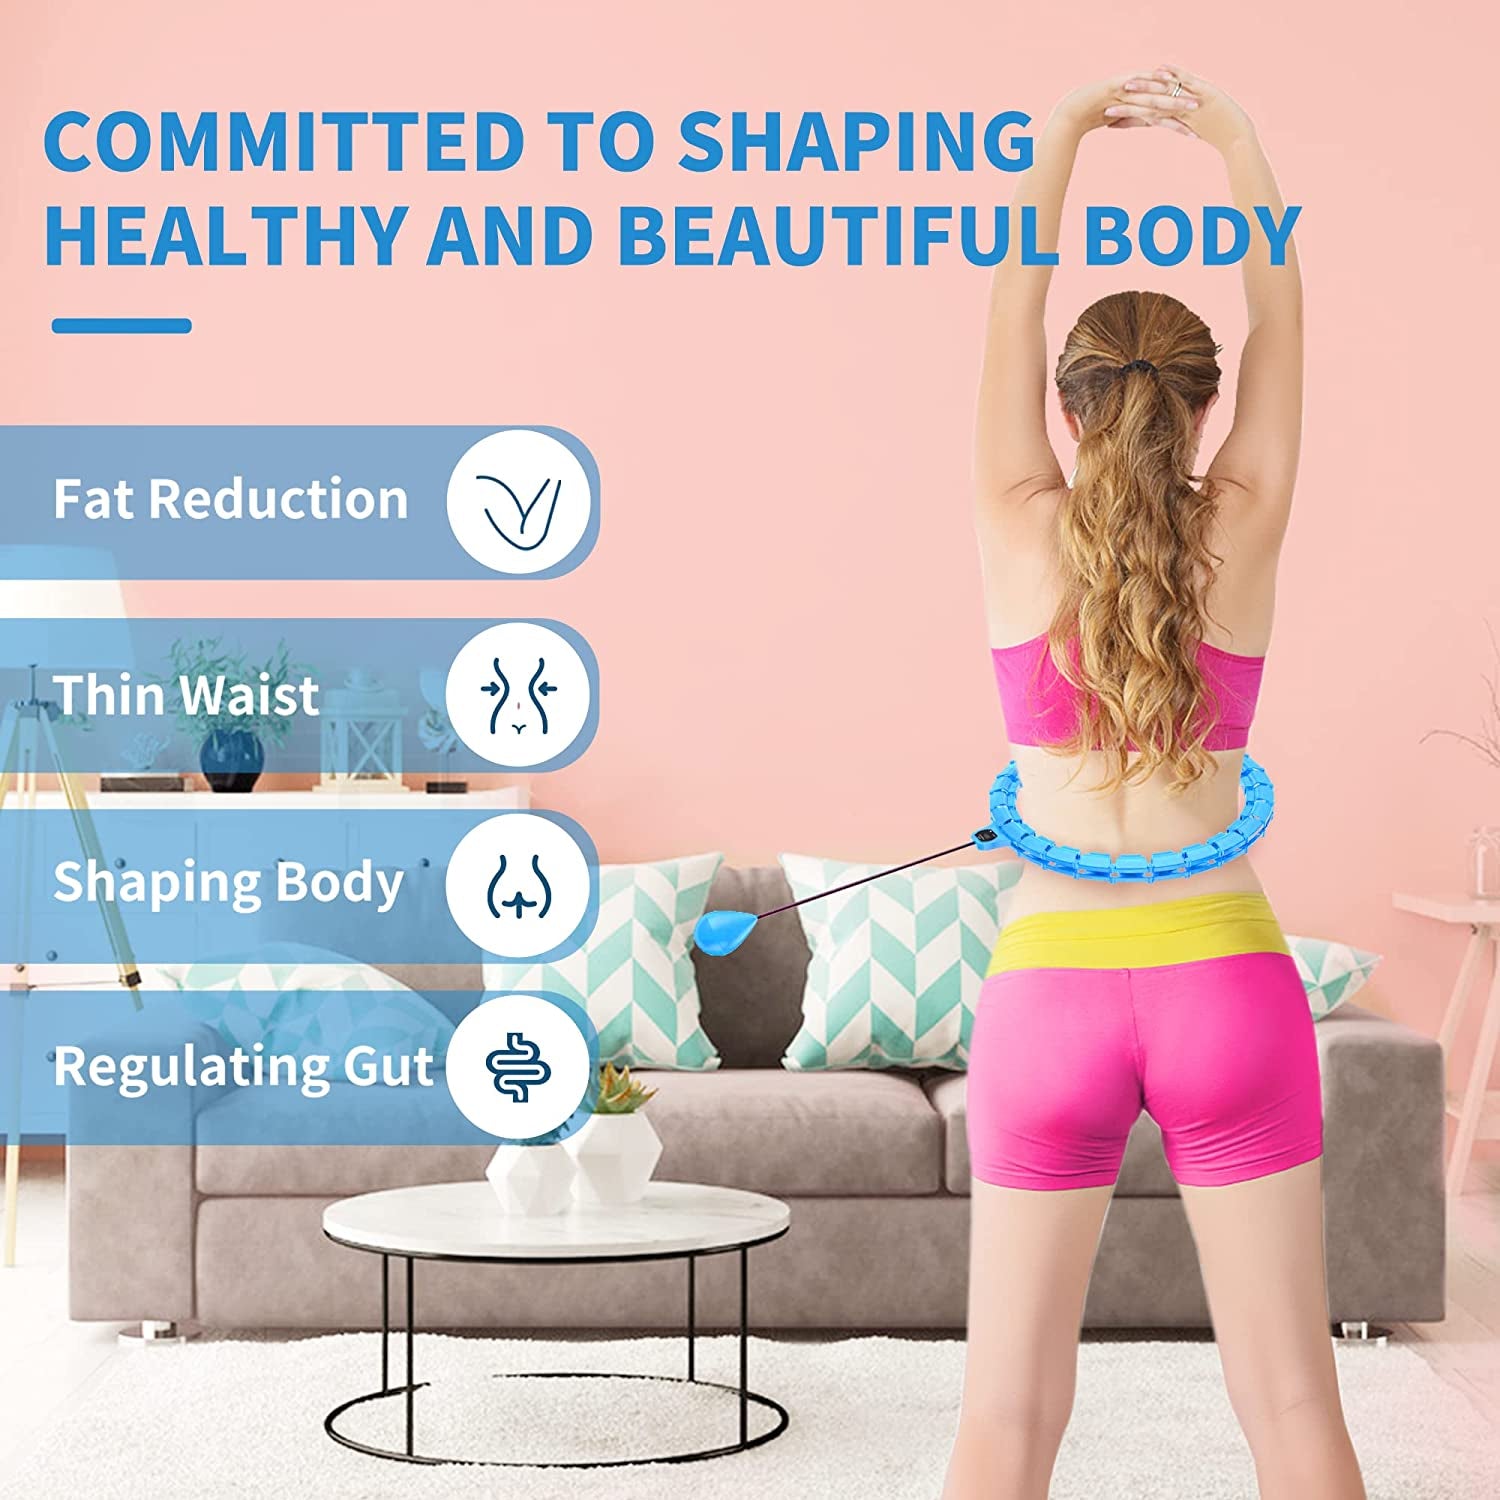 Smart Weighted Fit Hoop plus Size for Adults Weight Loss, 26 Detachable Knots, 2 in 1 Abdomen Fitness Massage, Noiseless Hoola Hoop, with Counter, Great for Exercise and Fitness